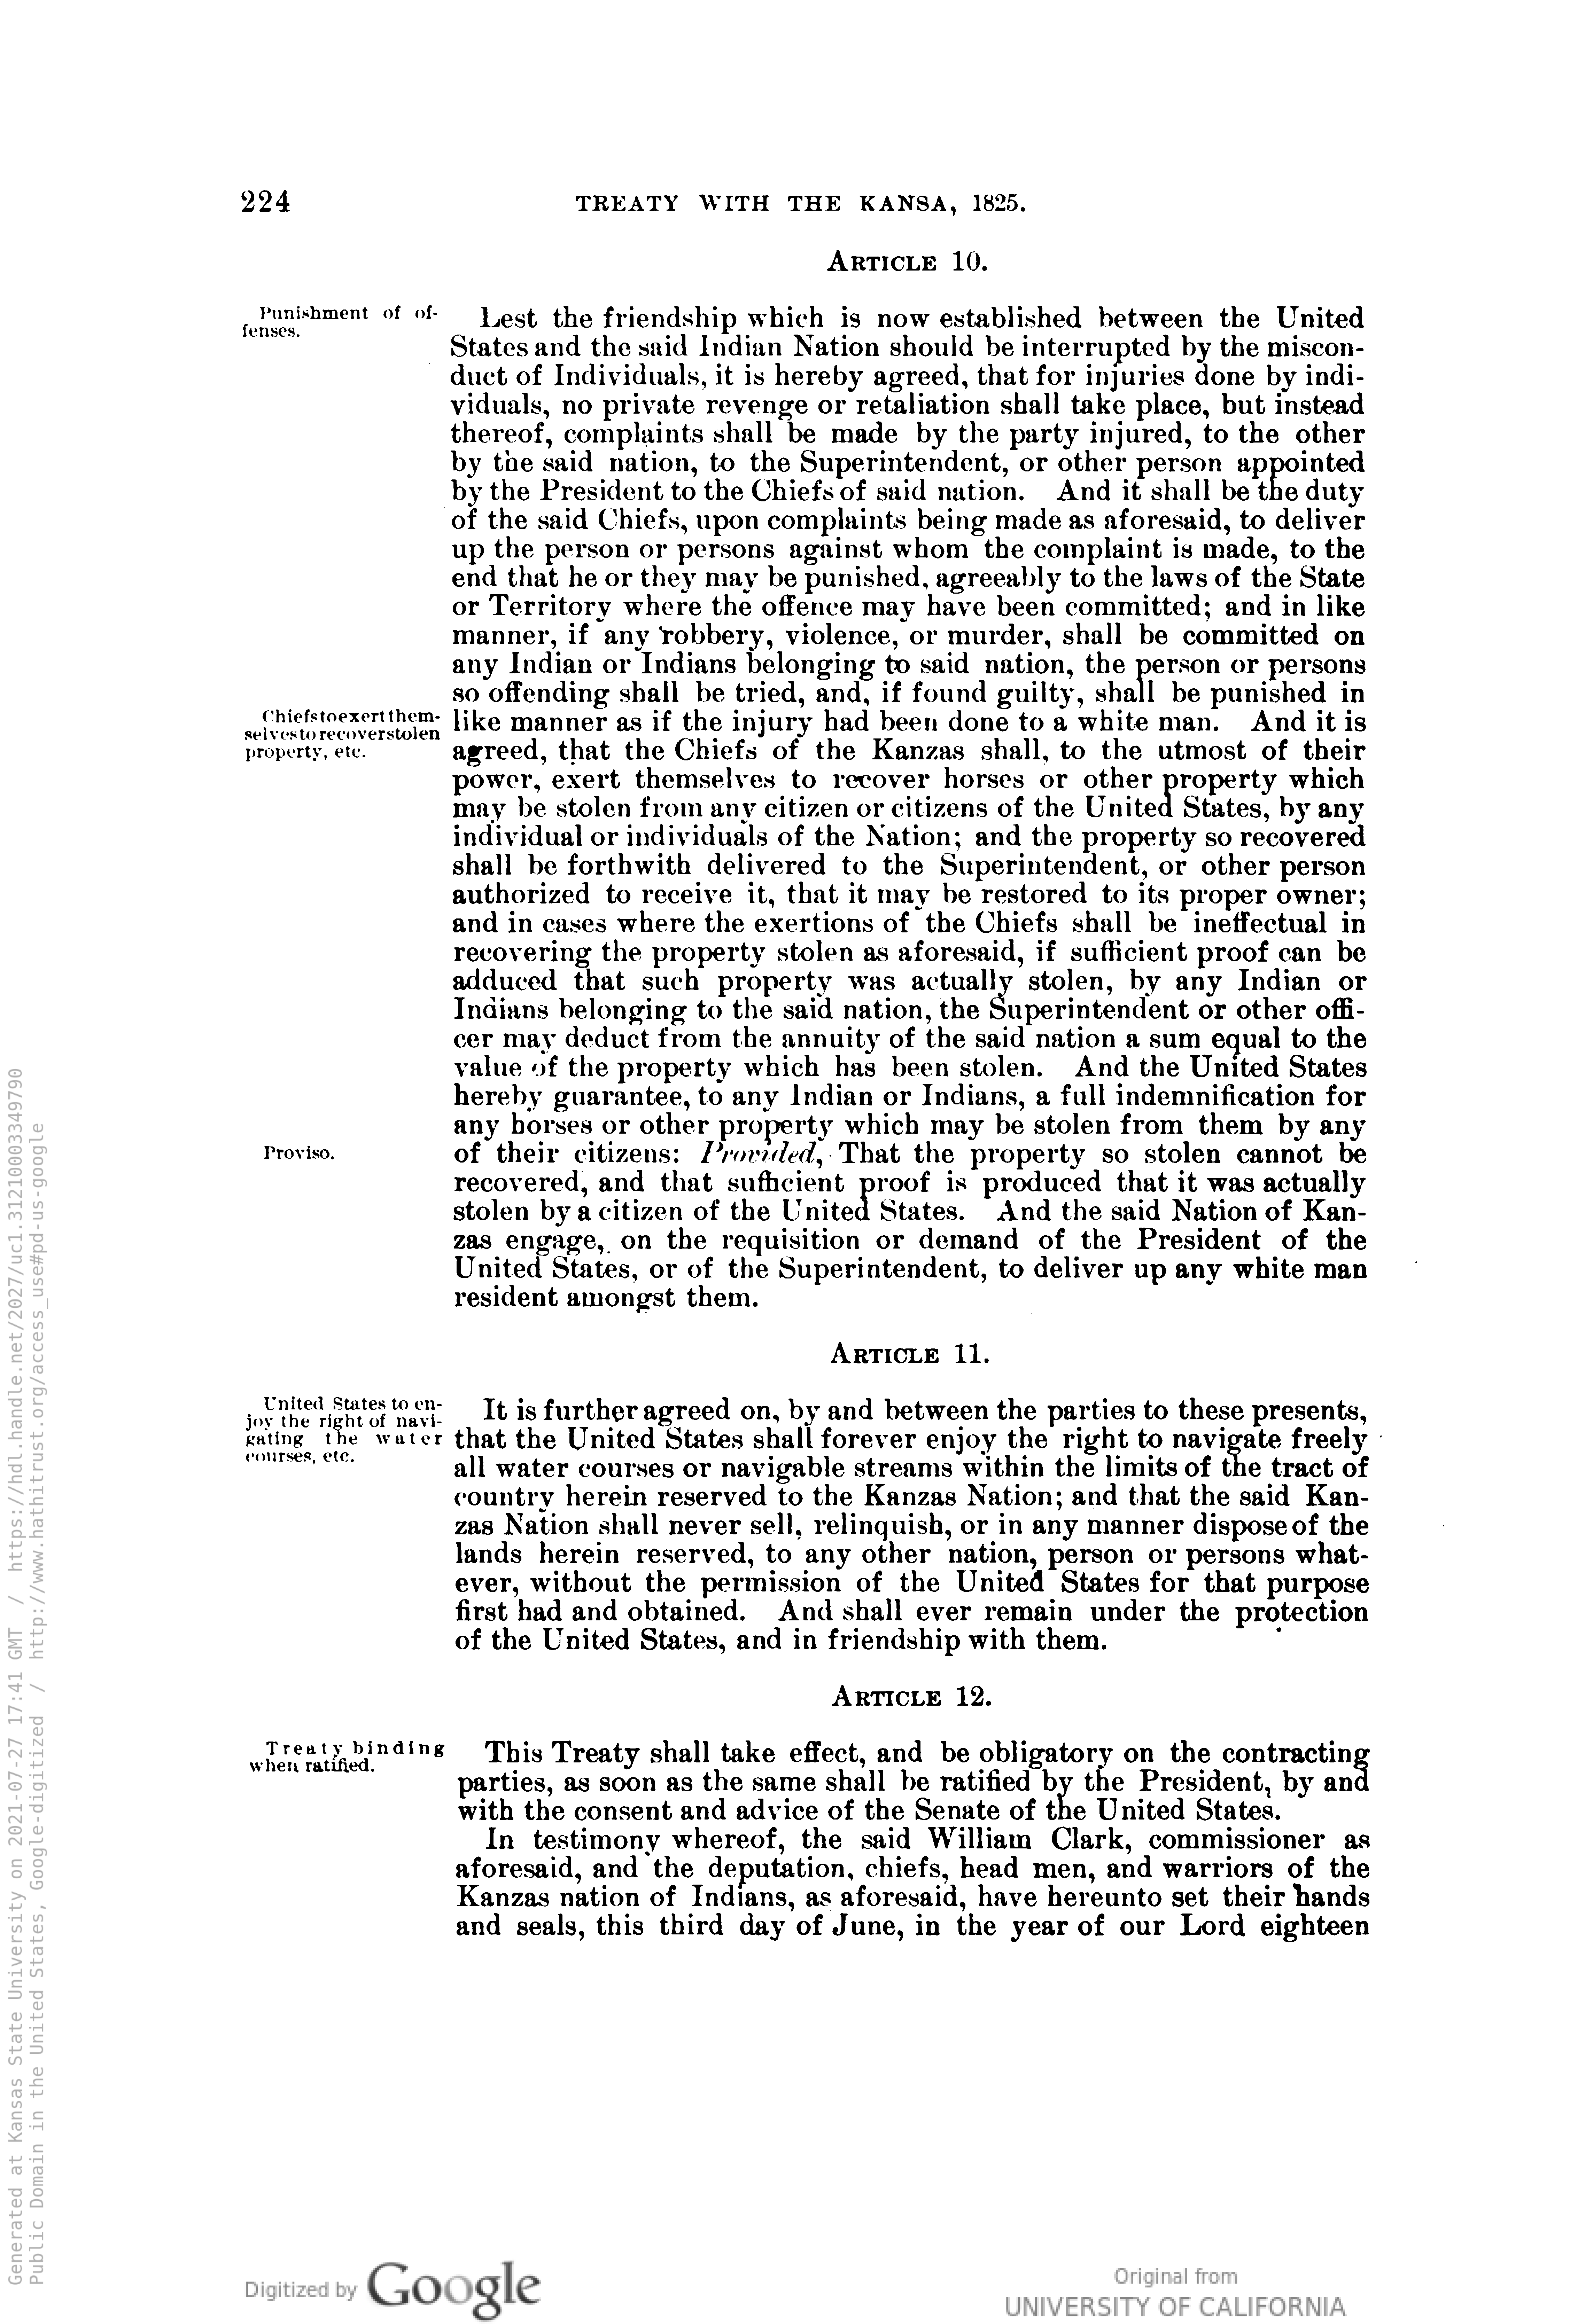 Treaty of 1825, Page 3